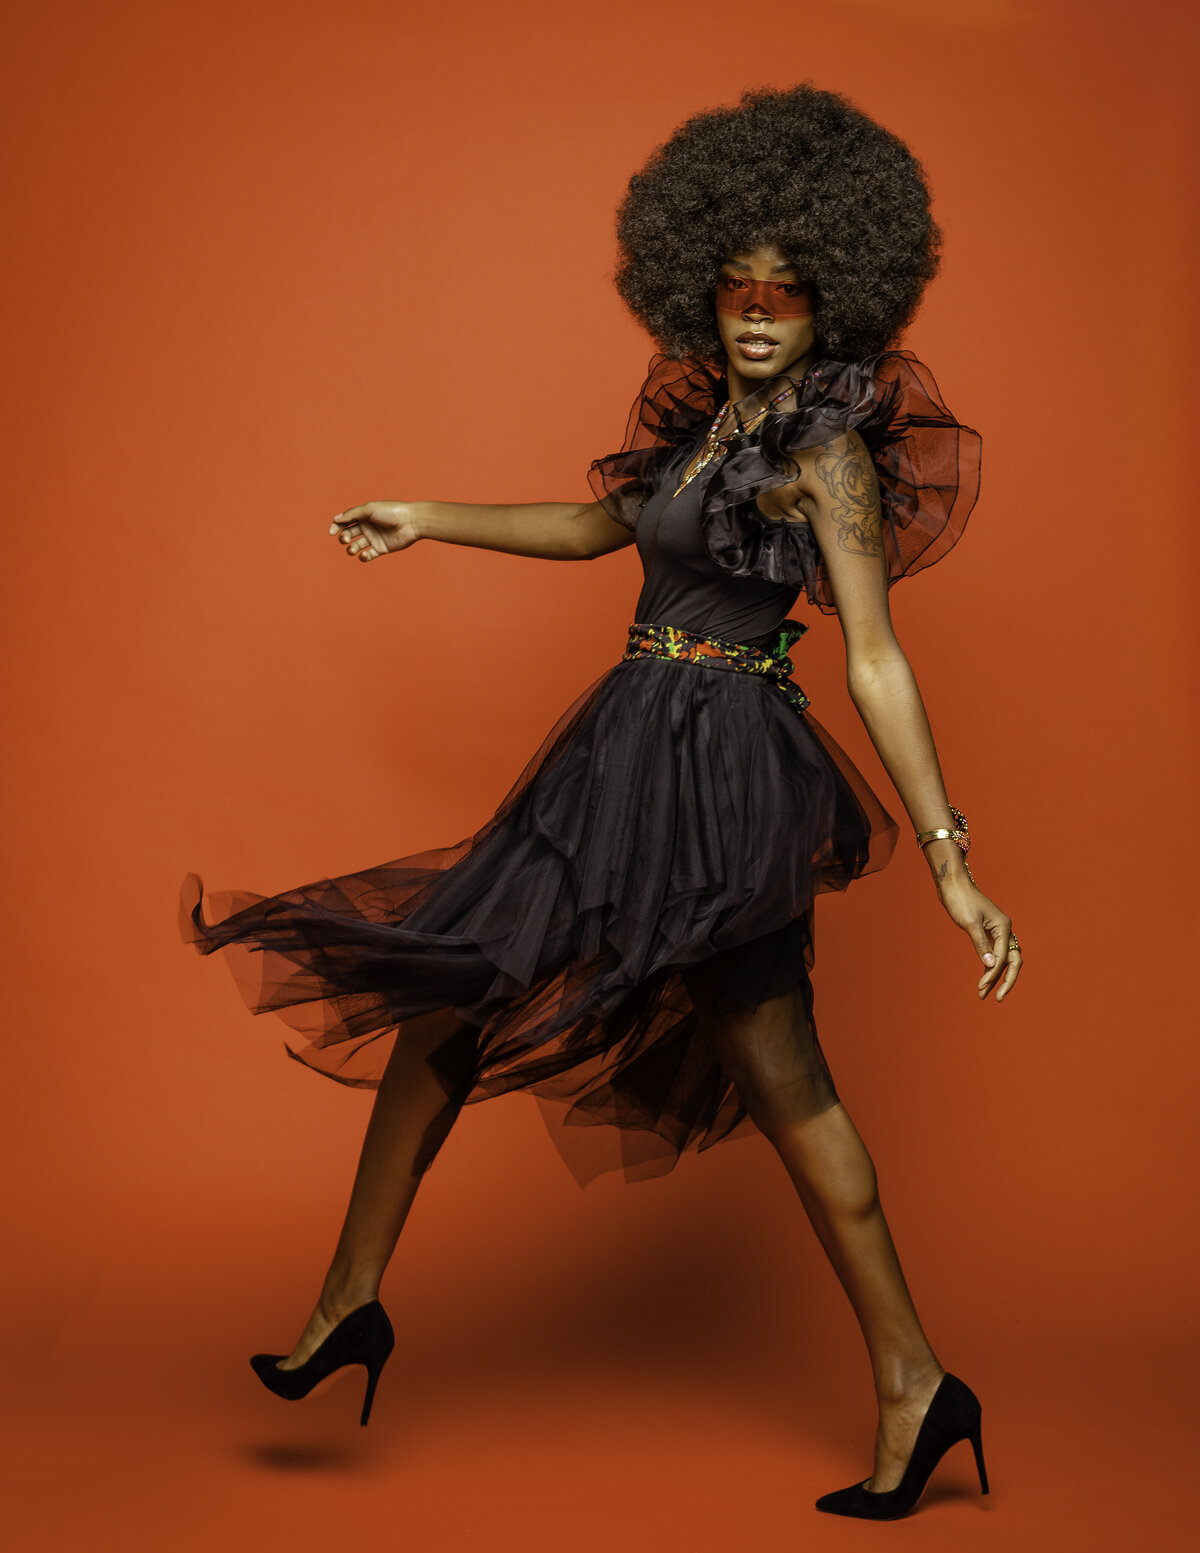 Black woman with afro in black outfit with red glasses